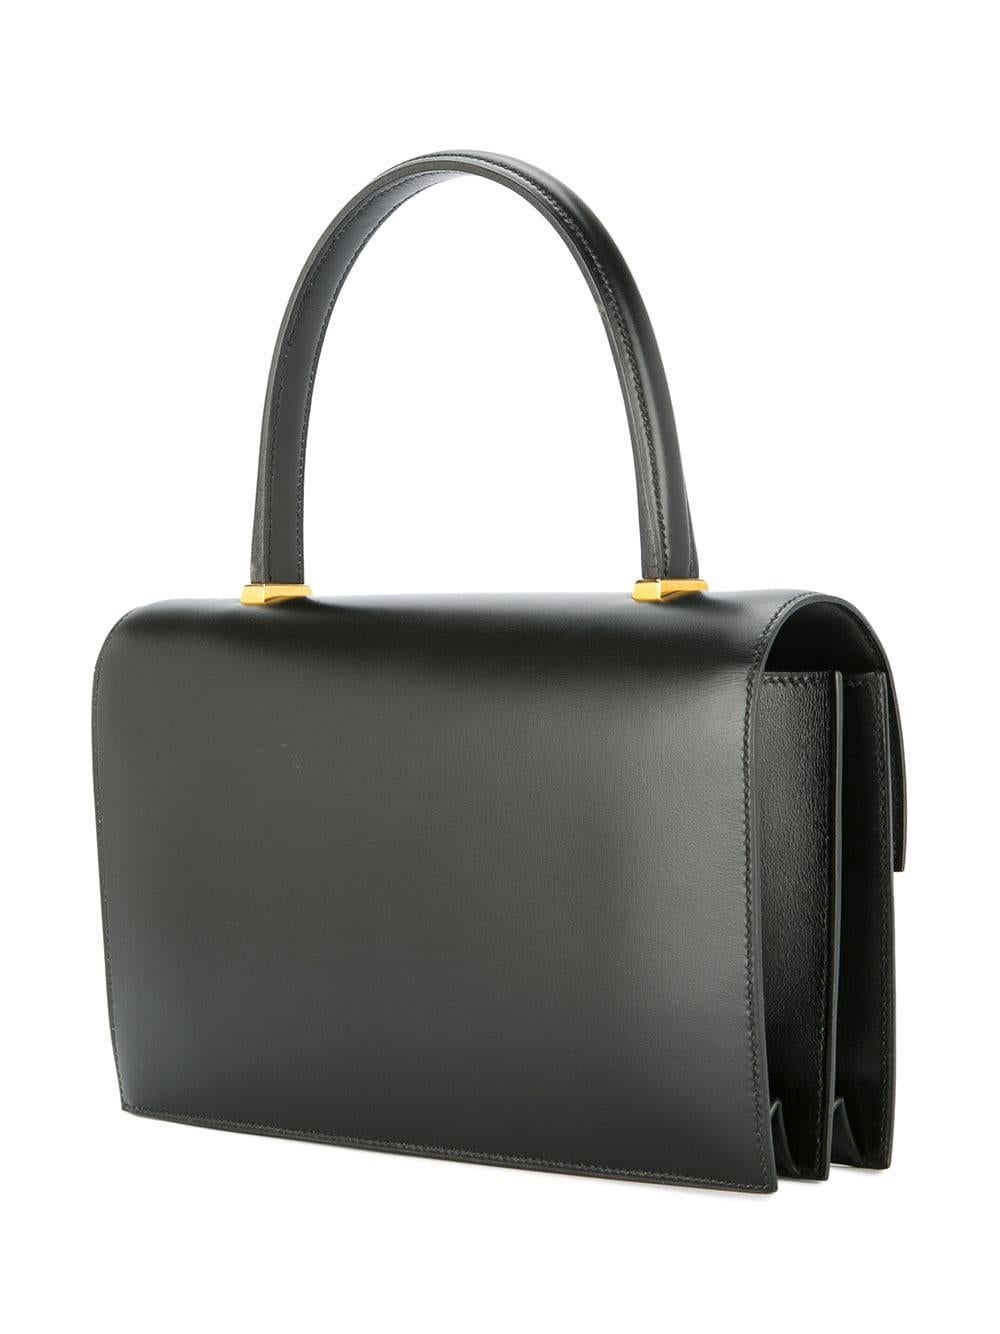 Hermes Black Leather Evening Gold Stud Top Handle Satchel Kelly Style Bag In Good Condition In Chicago, IL